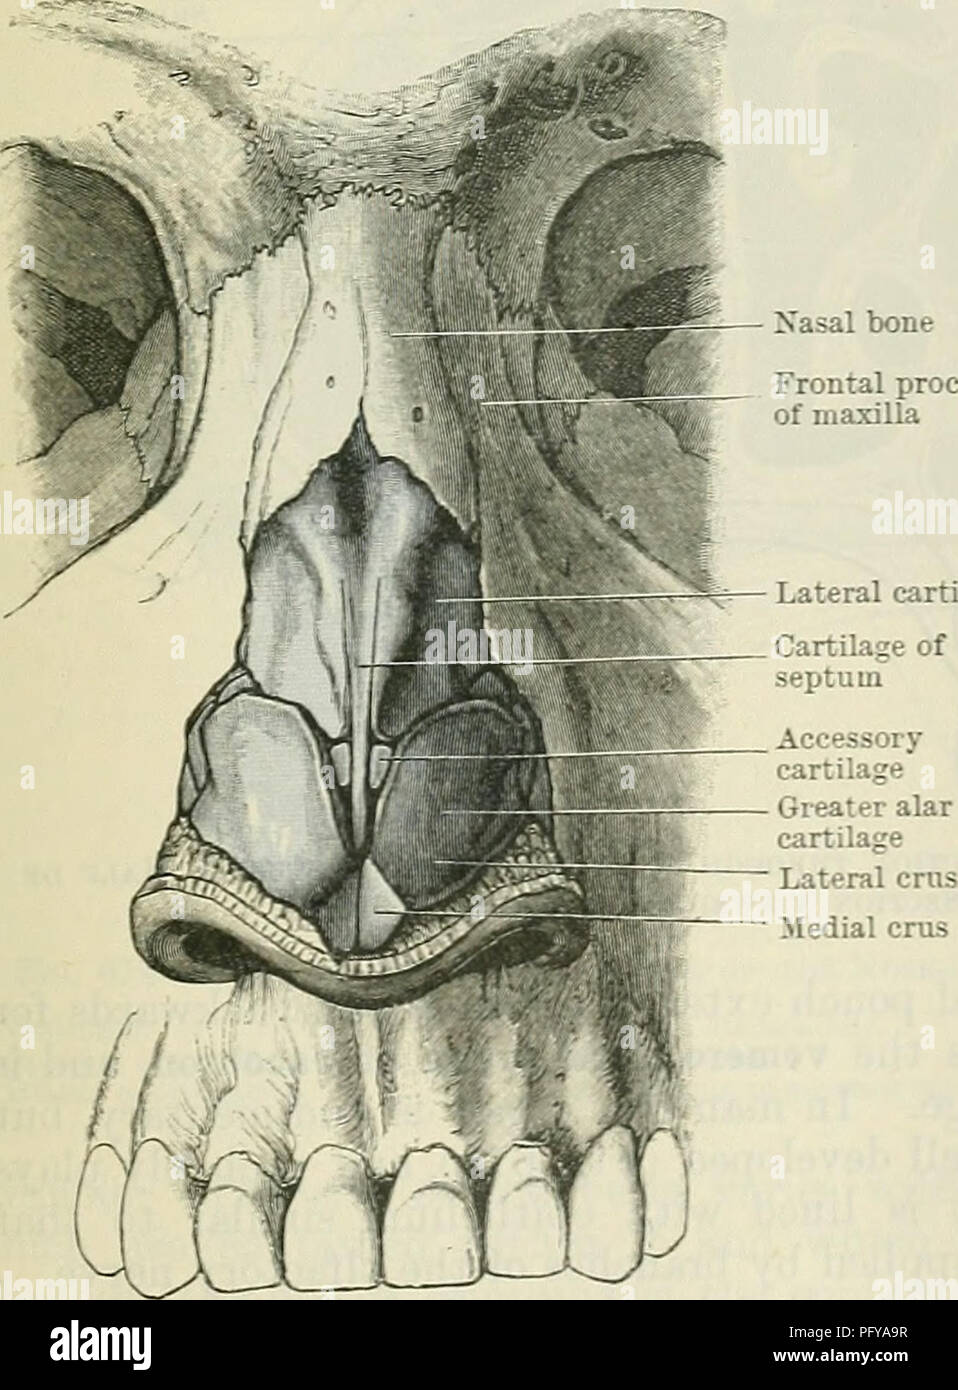 . Cunningham's Text-book of anatomy. Anatomy. Fig. 669.—Profile Yizvr of the Bont and Carti- laginous Skeleton of the External Nose. Xasal bone Frontal process of maxilla Lateral cartilage. Fig. 670. -Front View of the Bony and Cartilaginous Skeleton of the External Nob?. CAVTJM NASI. The nasal cavity (Fig. 672) is divided by the nasal septum into a right and a left nasal cavity, which extend from the nostrils in front to the choanae behind, and open, through the choanae, into the nasal part of the pharnyx. Their bony boundaries are described in the section on Osteology (p. 183). On the latera Stock Photo